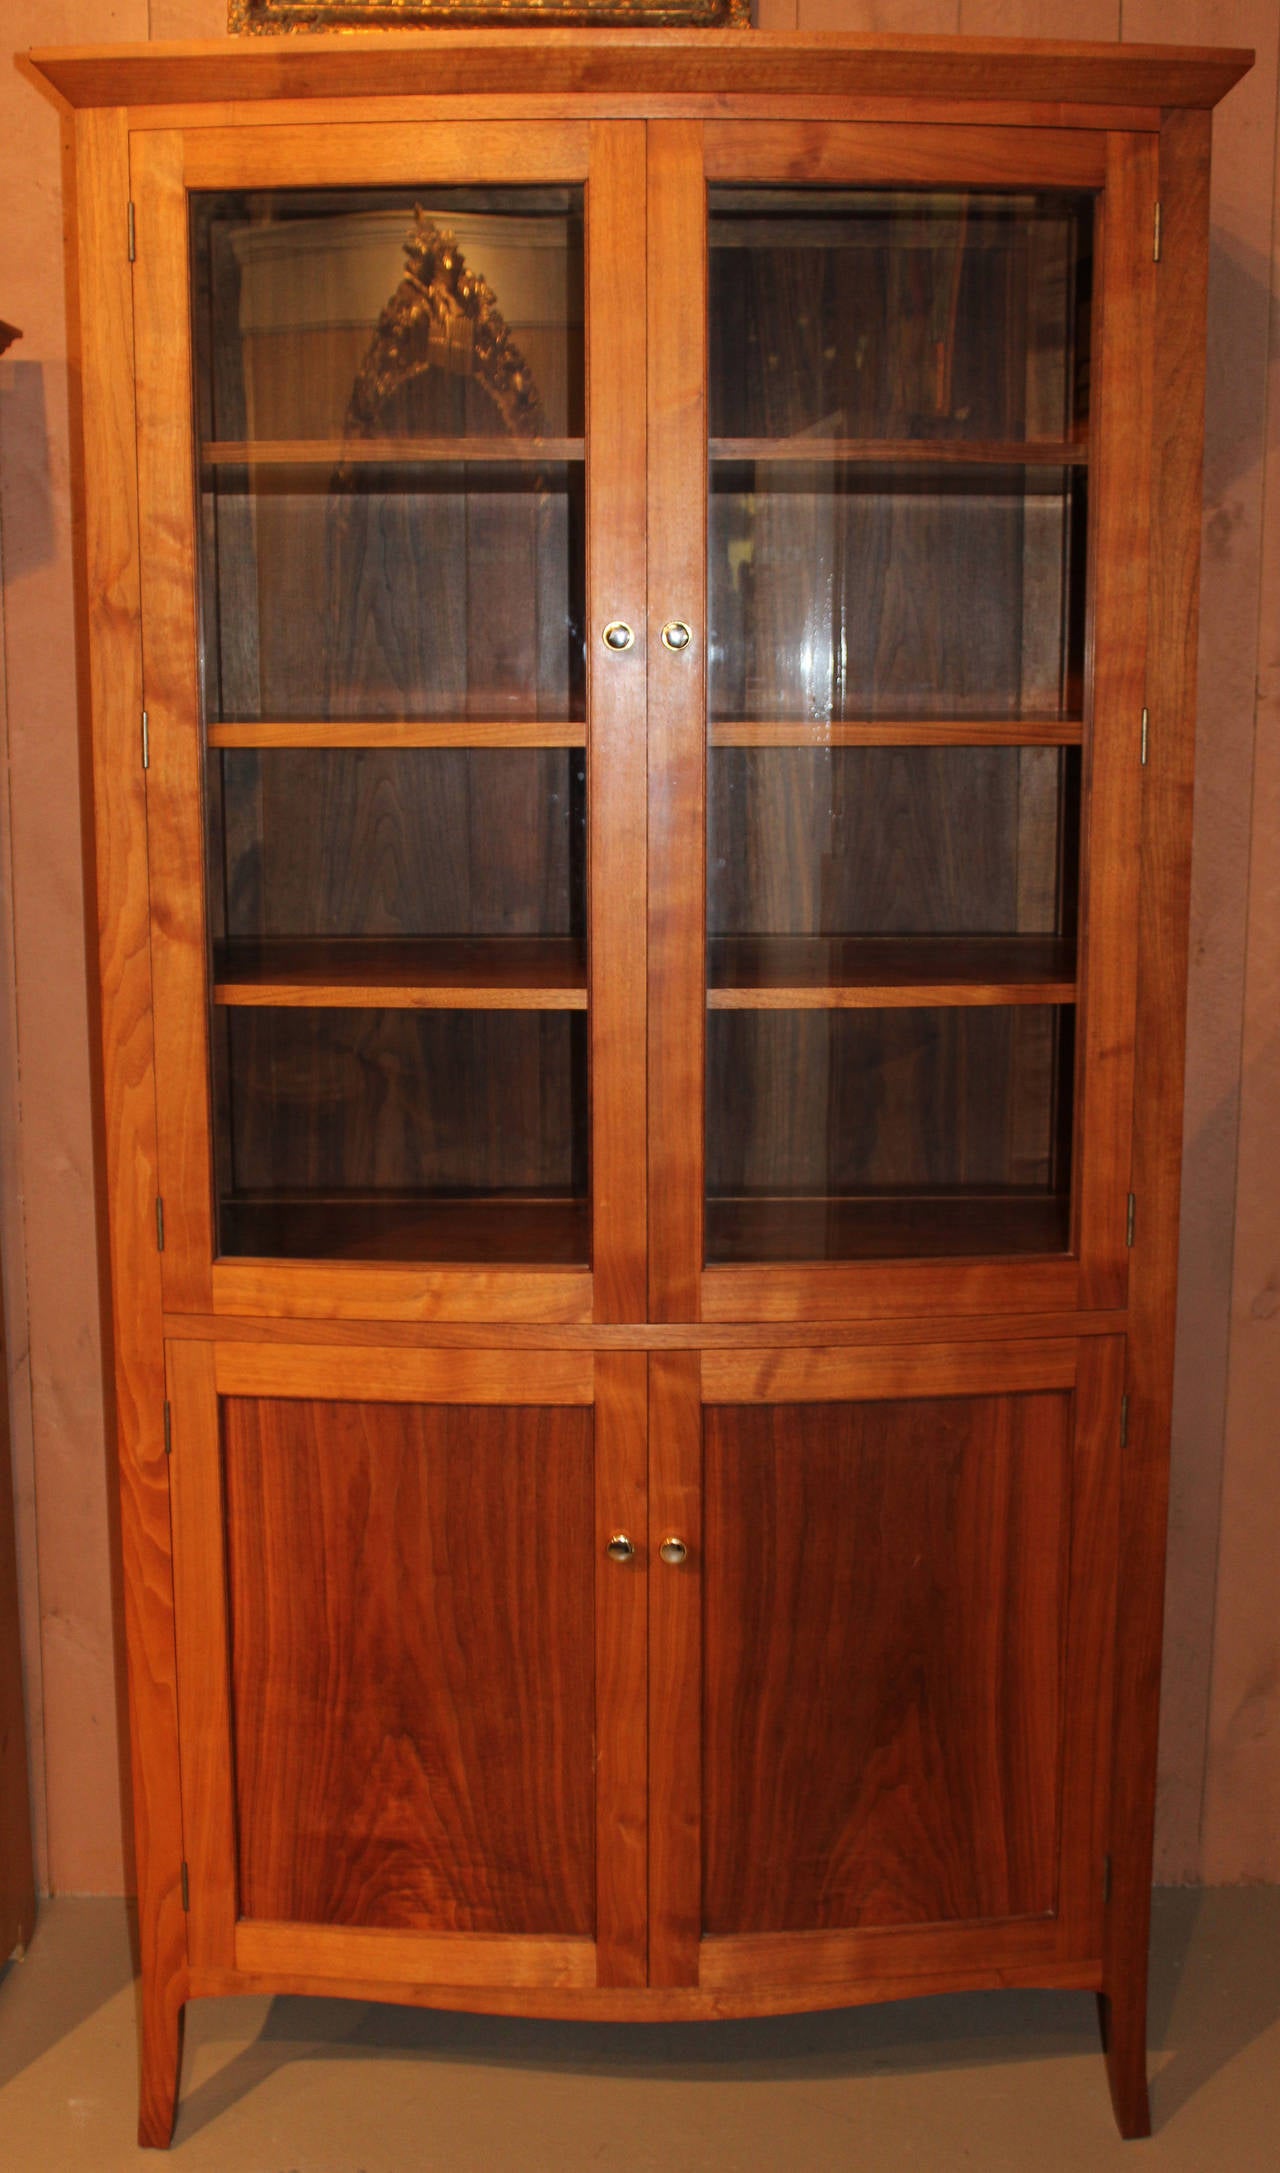 An exceptional cherry cupboard by David Margonelli with a two convex glass doors opening to four adjustable shelves with an integral lower section with cabinet doors opening to reveal conforming drawers. Beautifully crafted with paneled back.